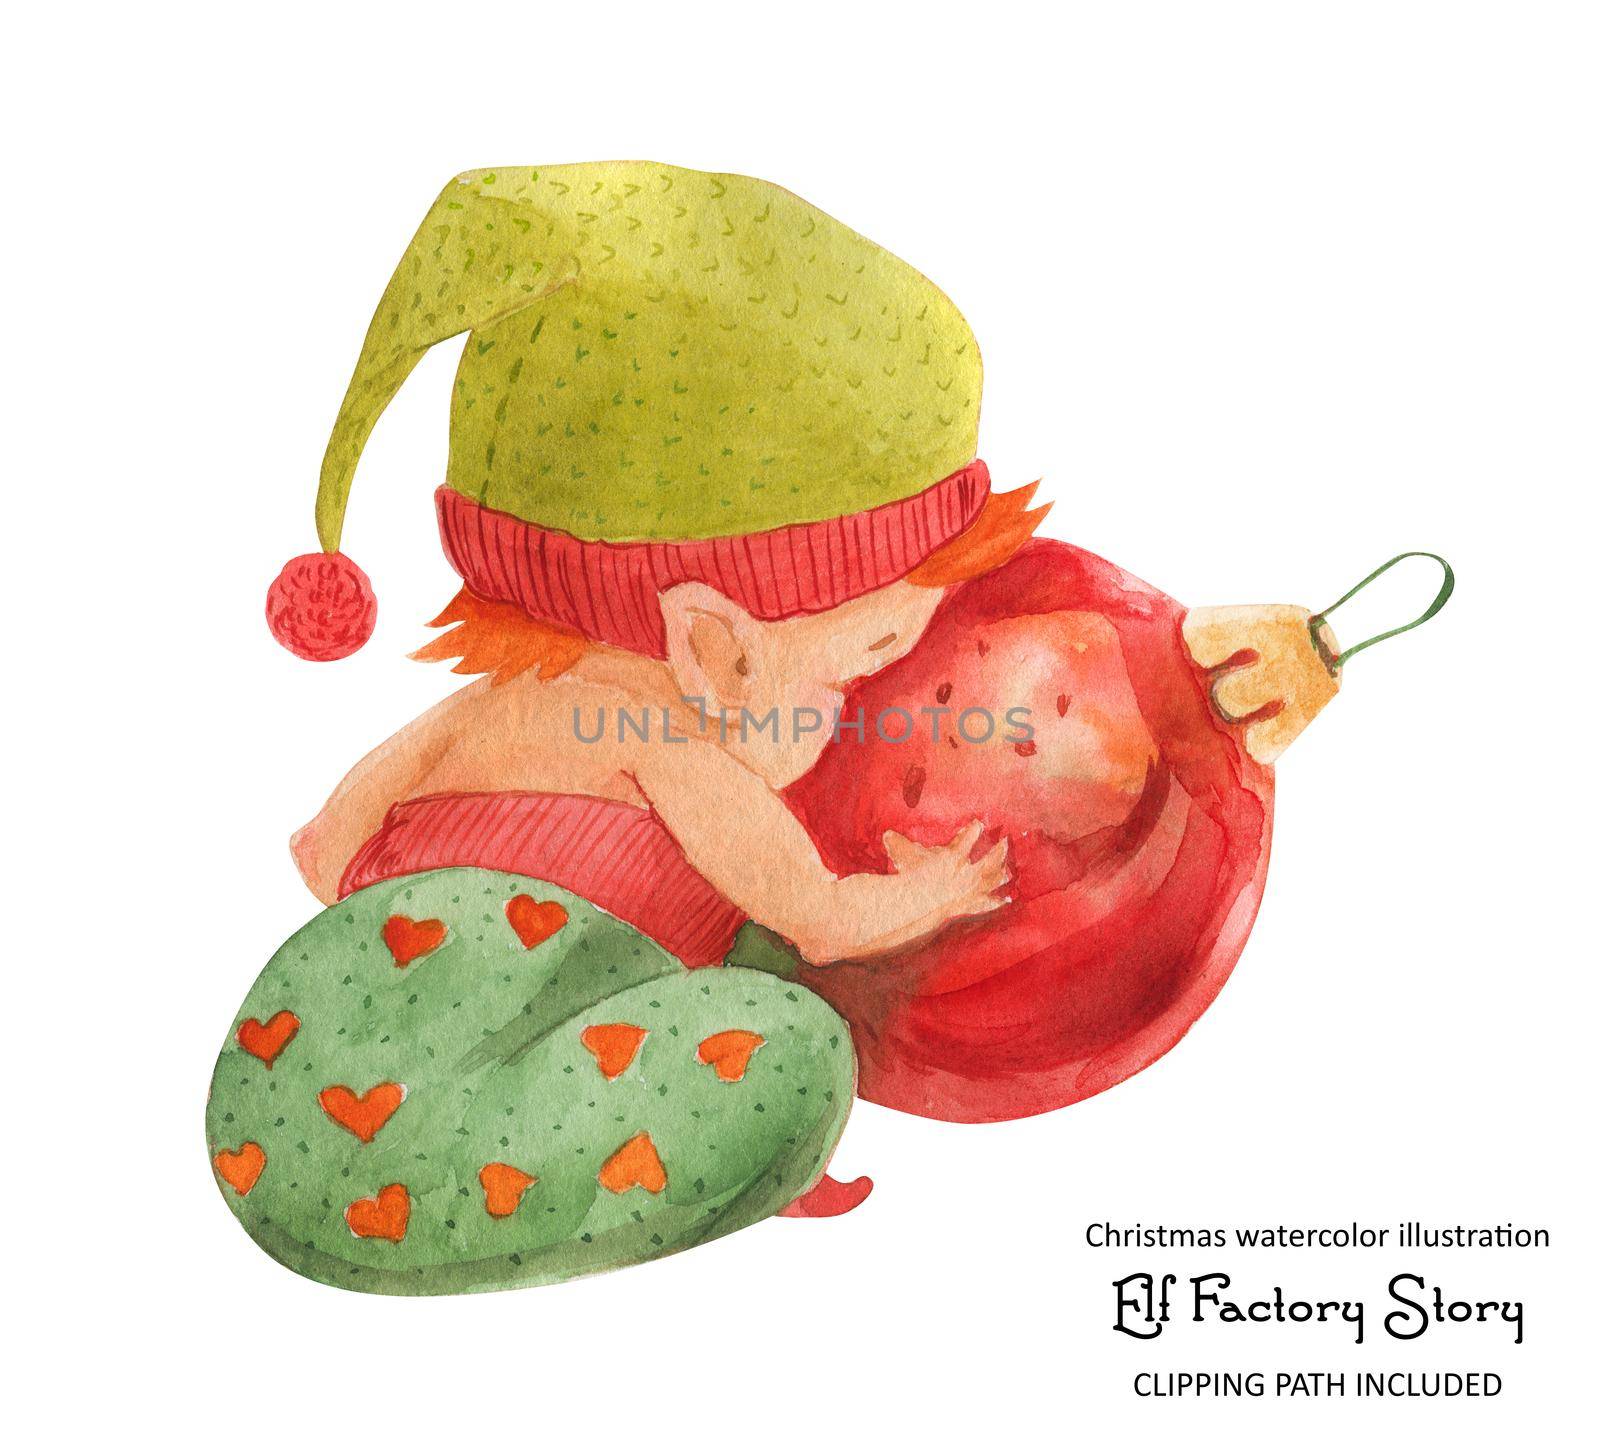 Christmas elf story, elf-baby looking in a Christmas ball, isolated watercolor and clipping path